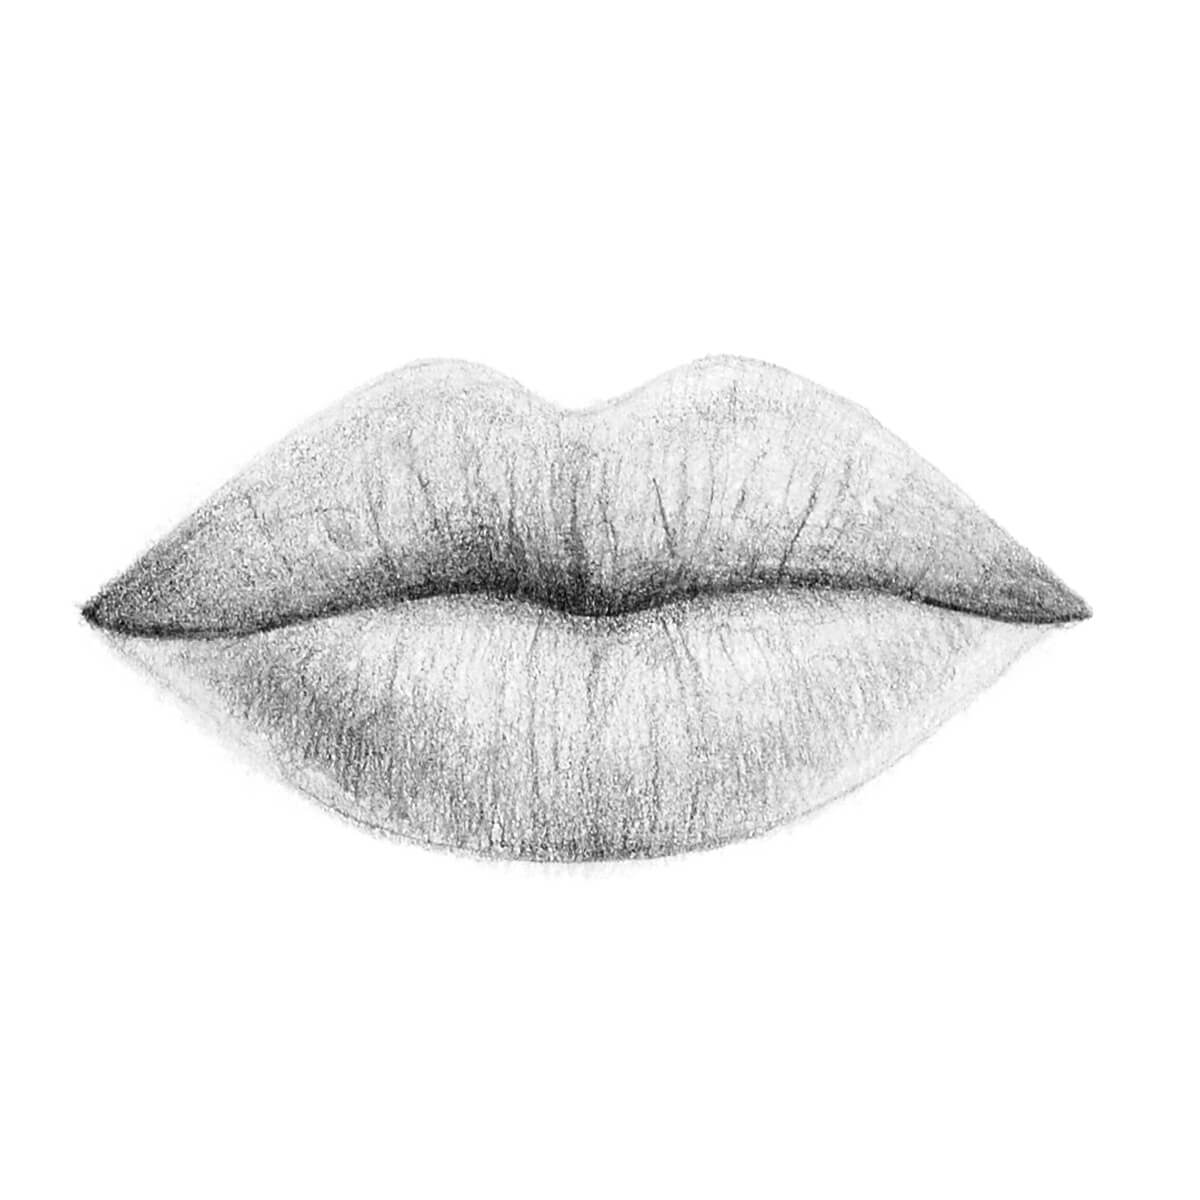 lips drawing easy - step 5